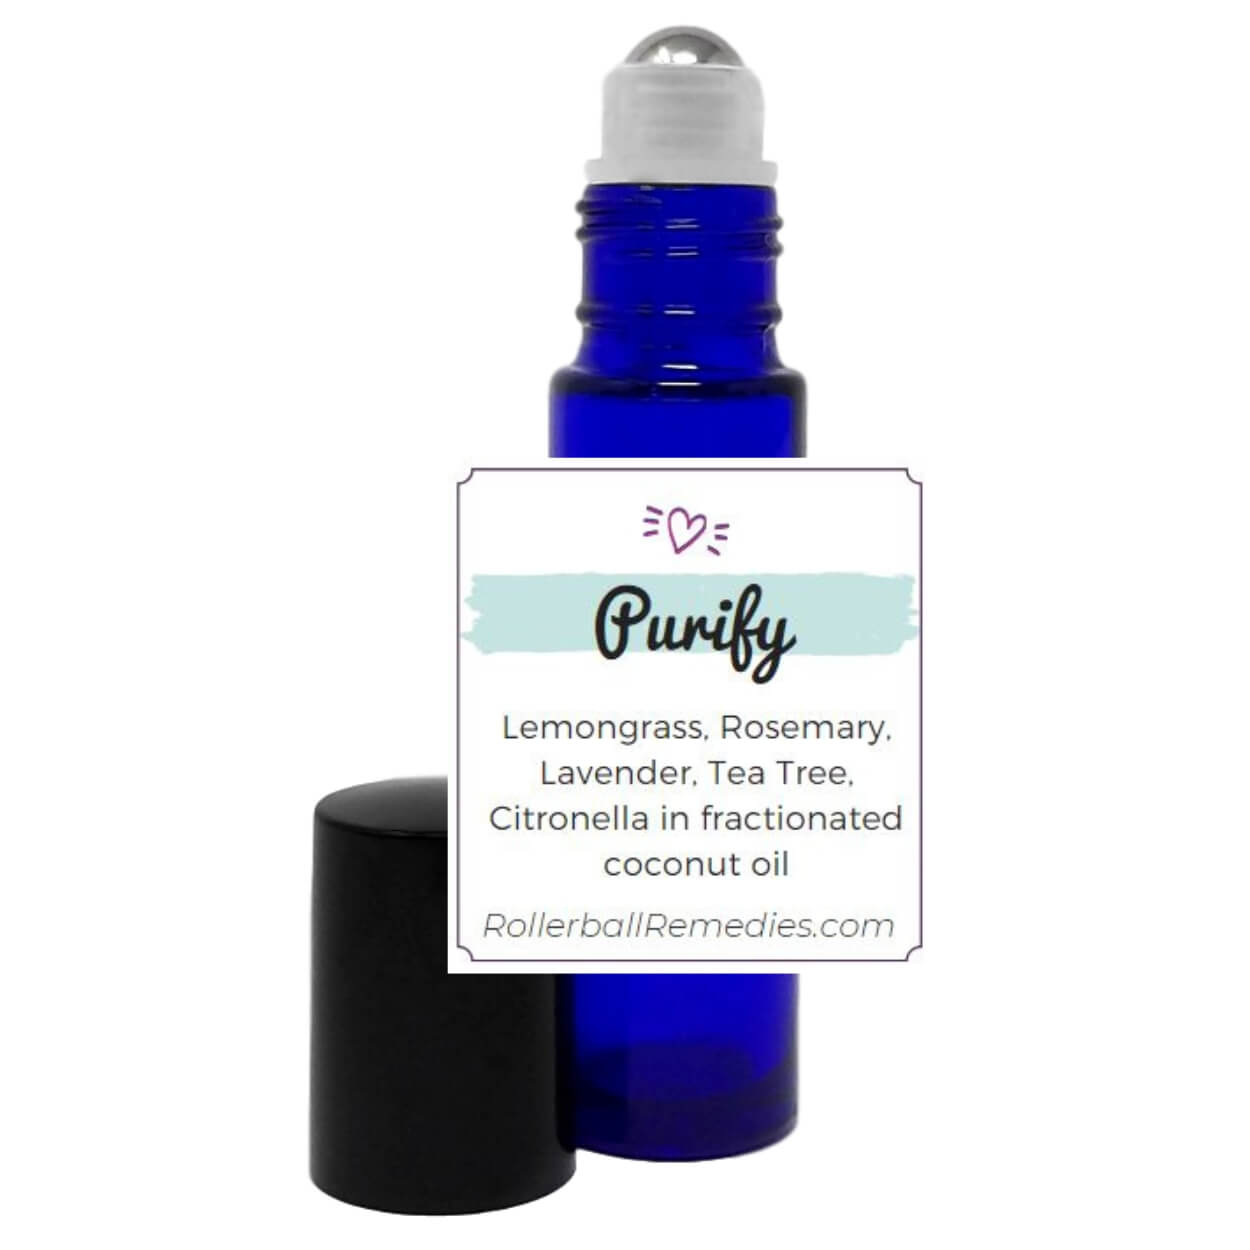 Purify Essential Oil Blend - 10 ml Roller Bottle with Lemongrass, Rosemary, Tea Tree, Lavender, and Citronella